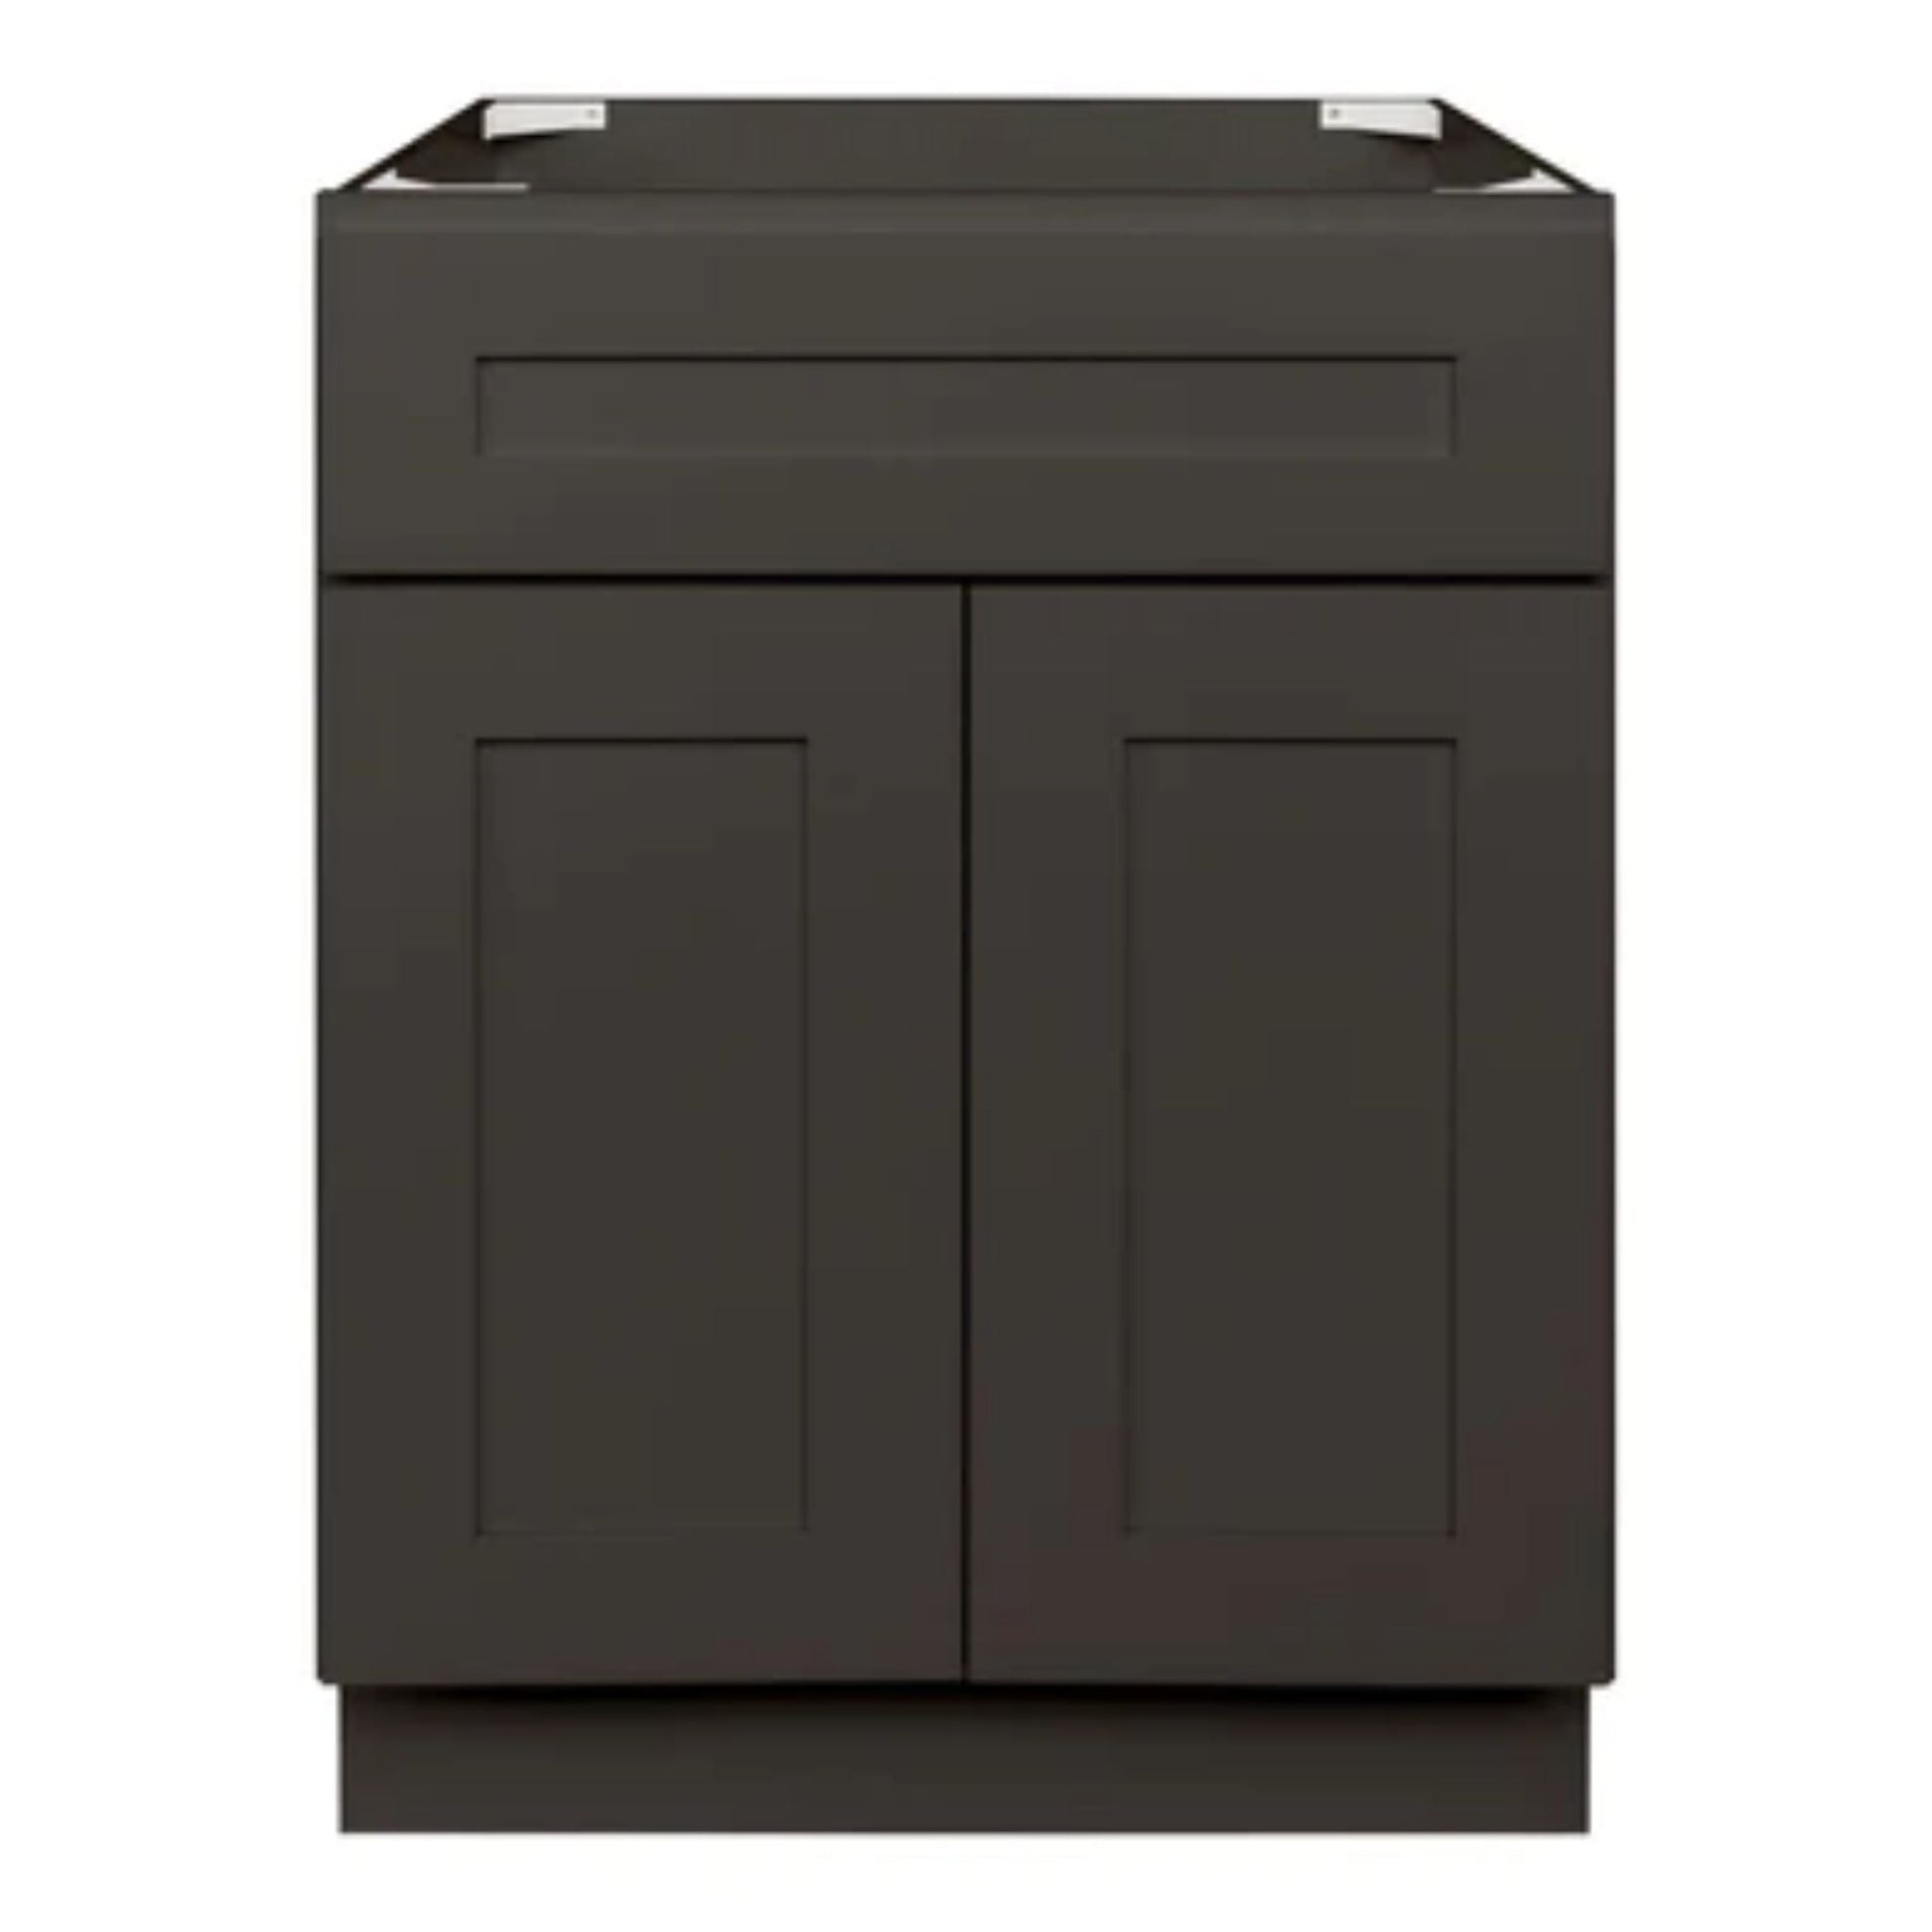 LessCare 24" x 34.5" x 21" Avalon Charcoal Vanity Sink Base Cabinet